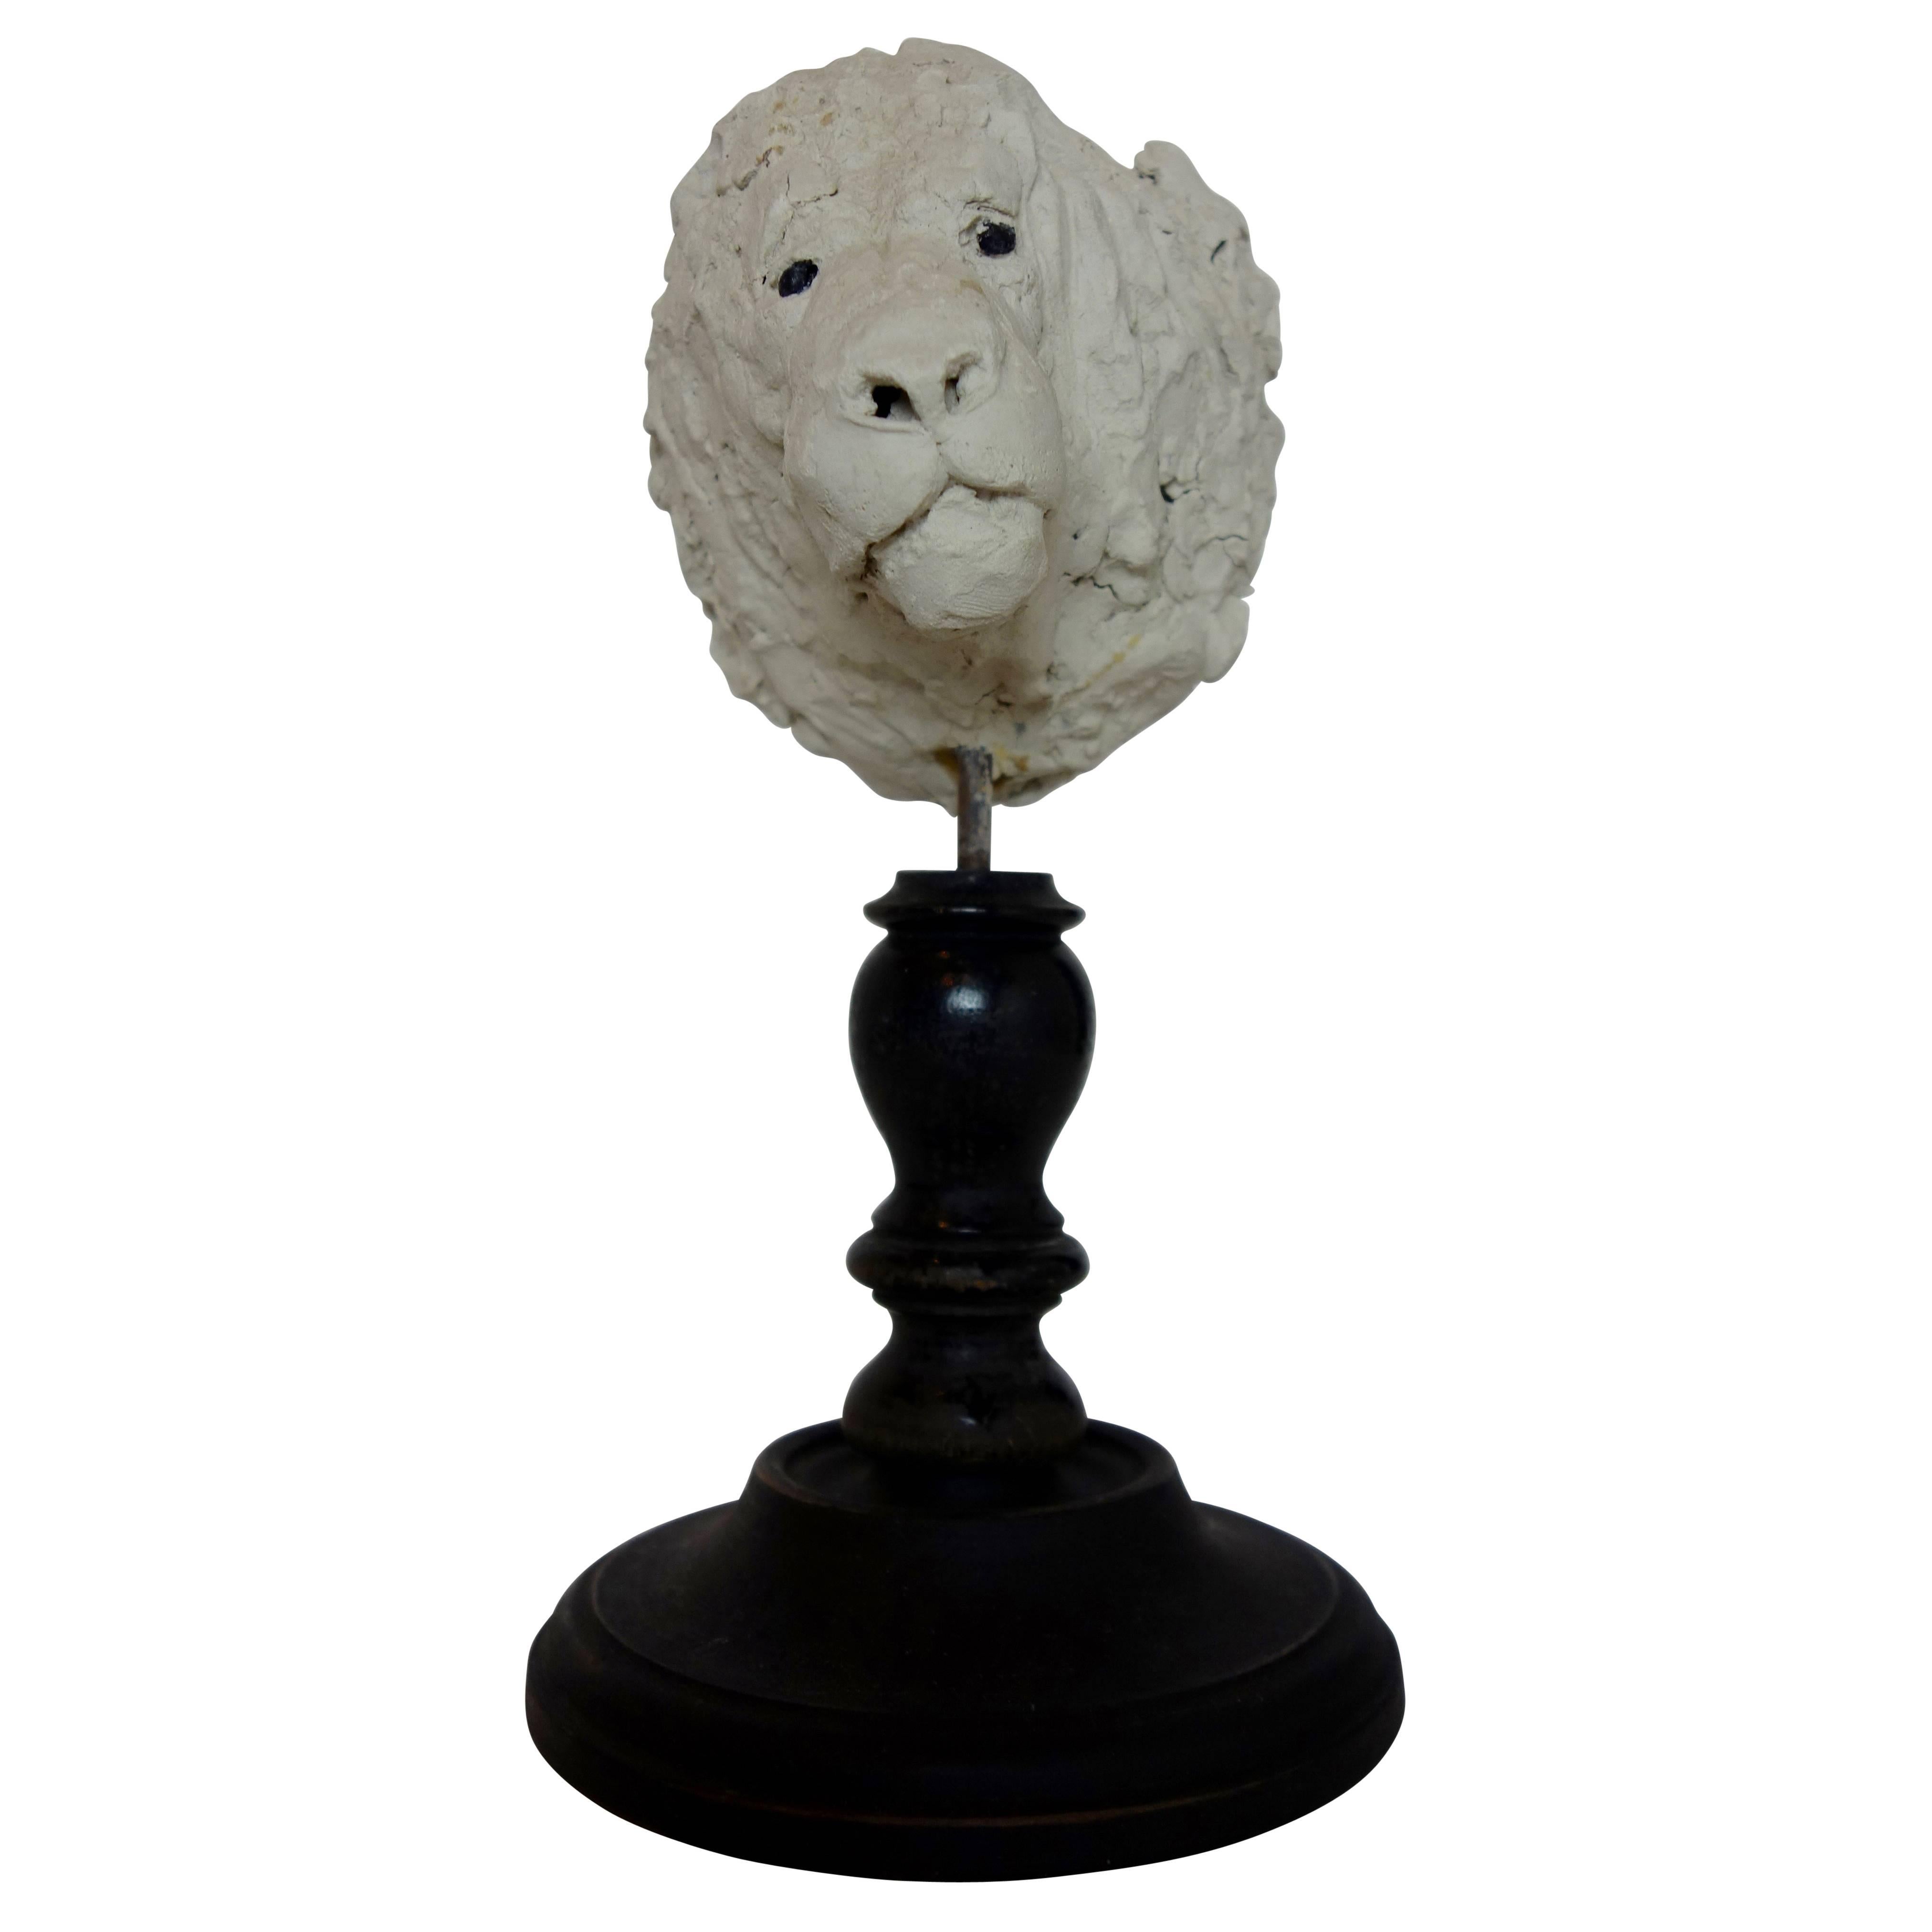 19th Century Plaster Lion Head Sculpture on Wood Stand